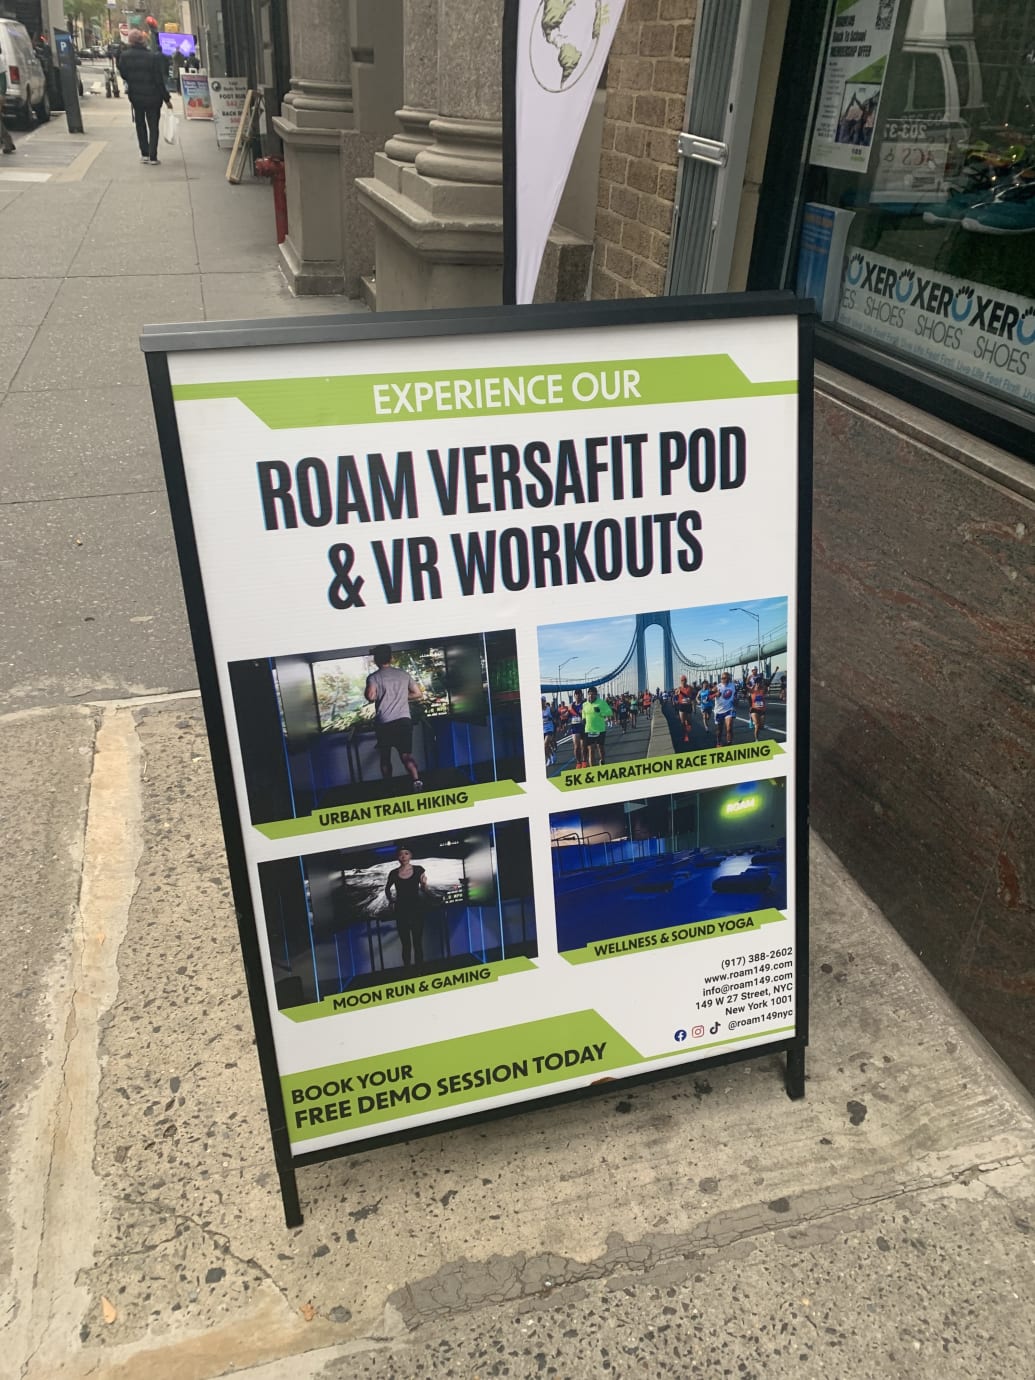 A sign outside Roam149 advertises pod and VR workouts in virtual environments including the lunar surface.